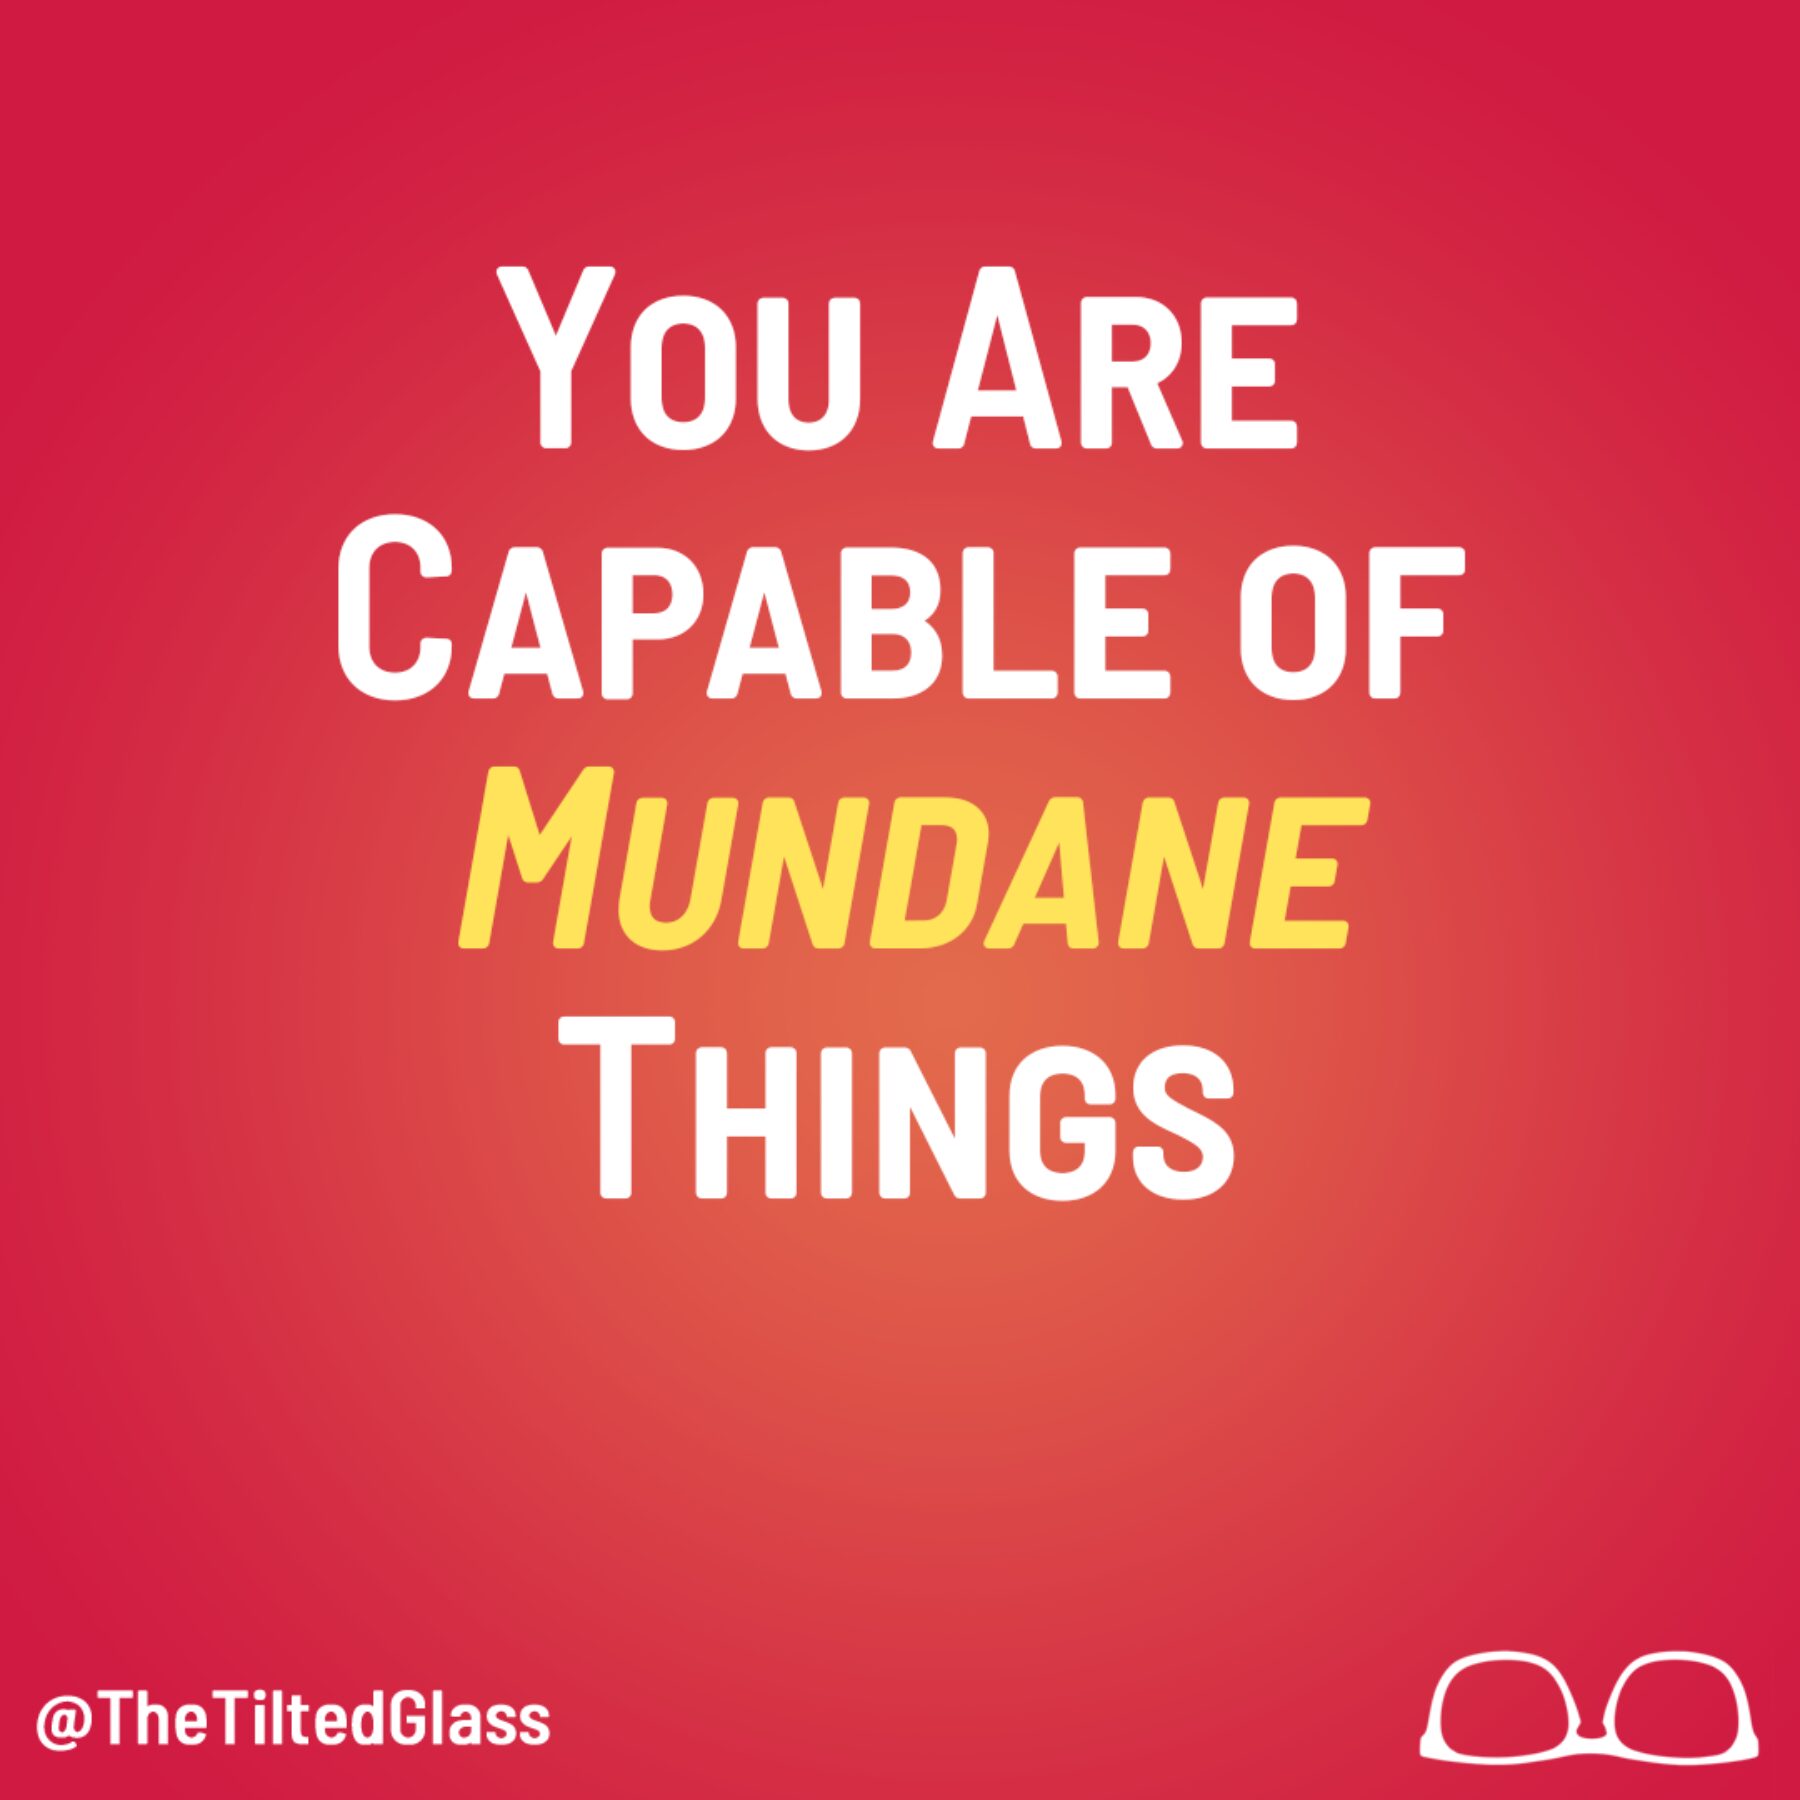 You Are Capable of Mundae Things